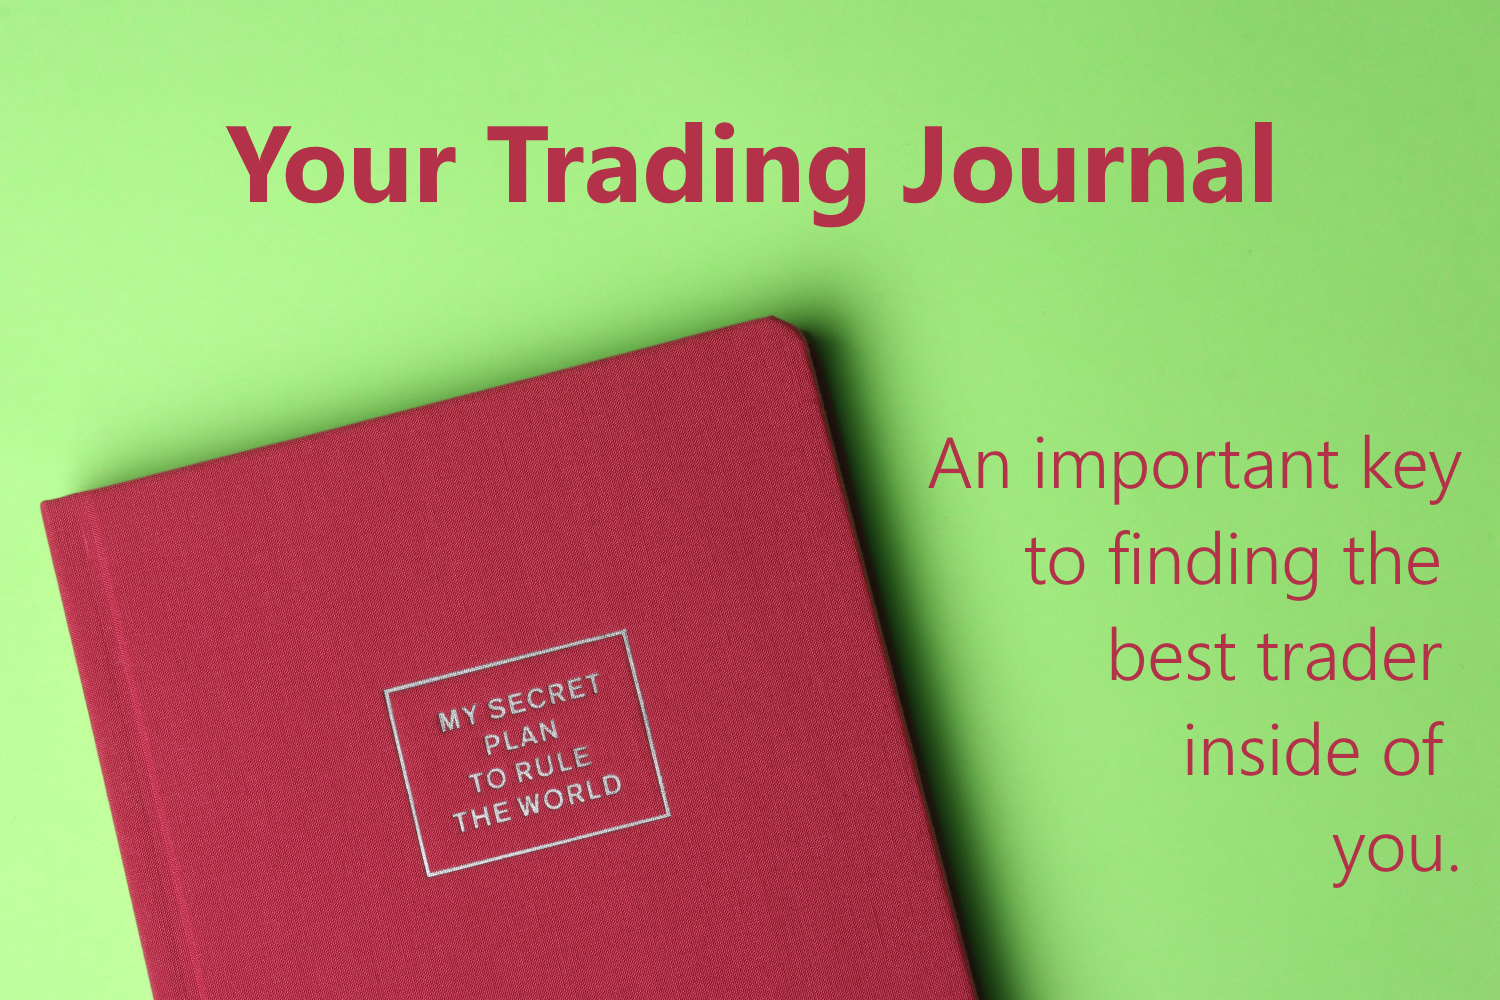 Your stock trading journal is an important key to finding the best trader inside of you.